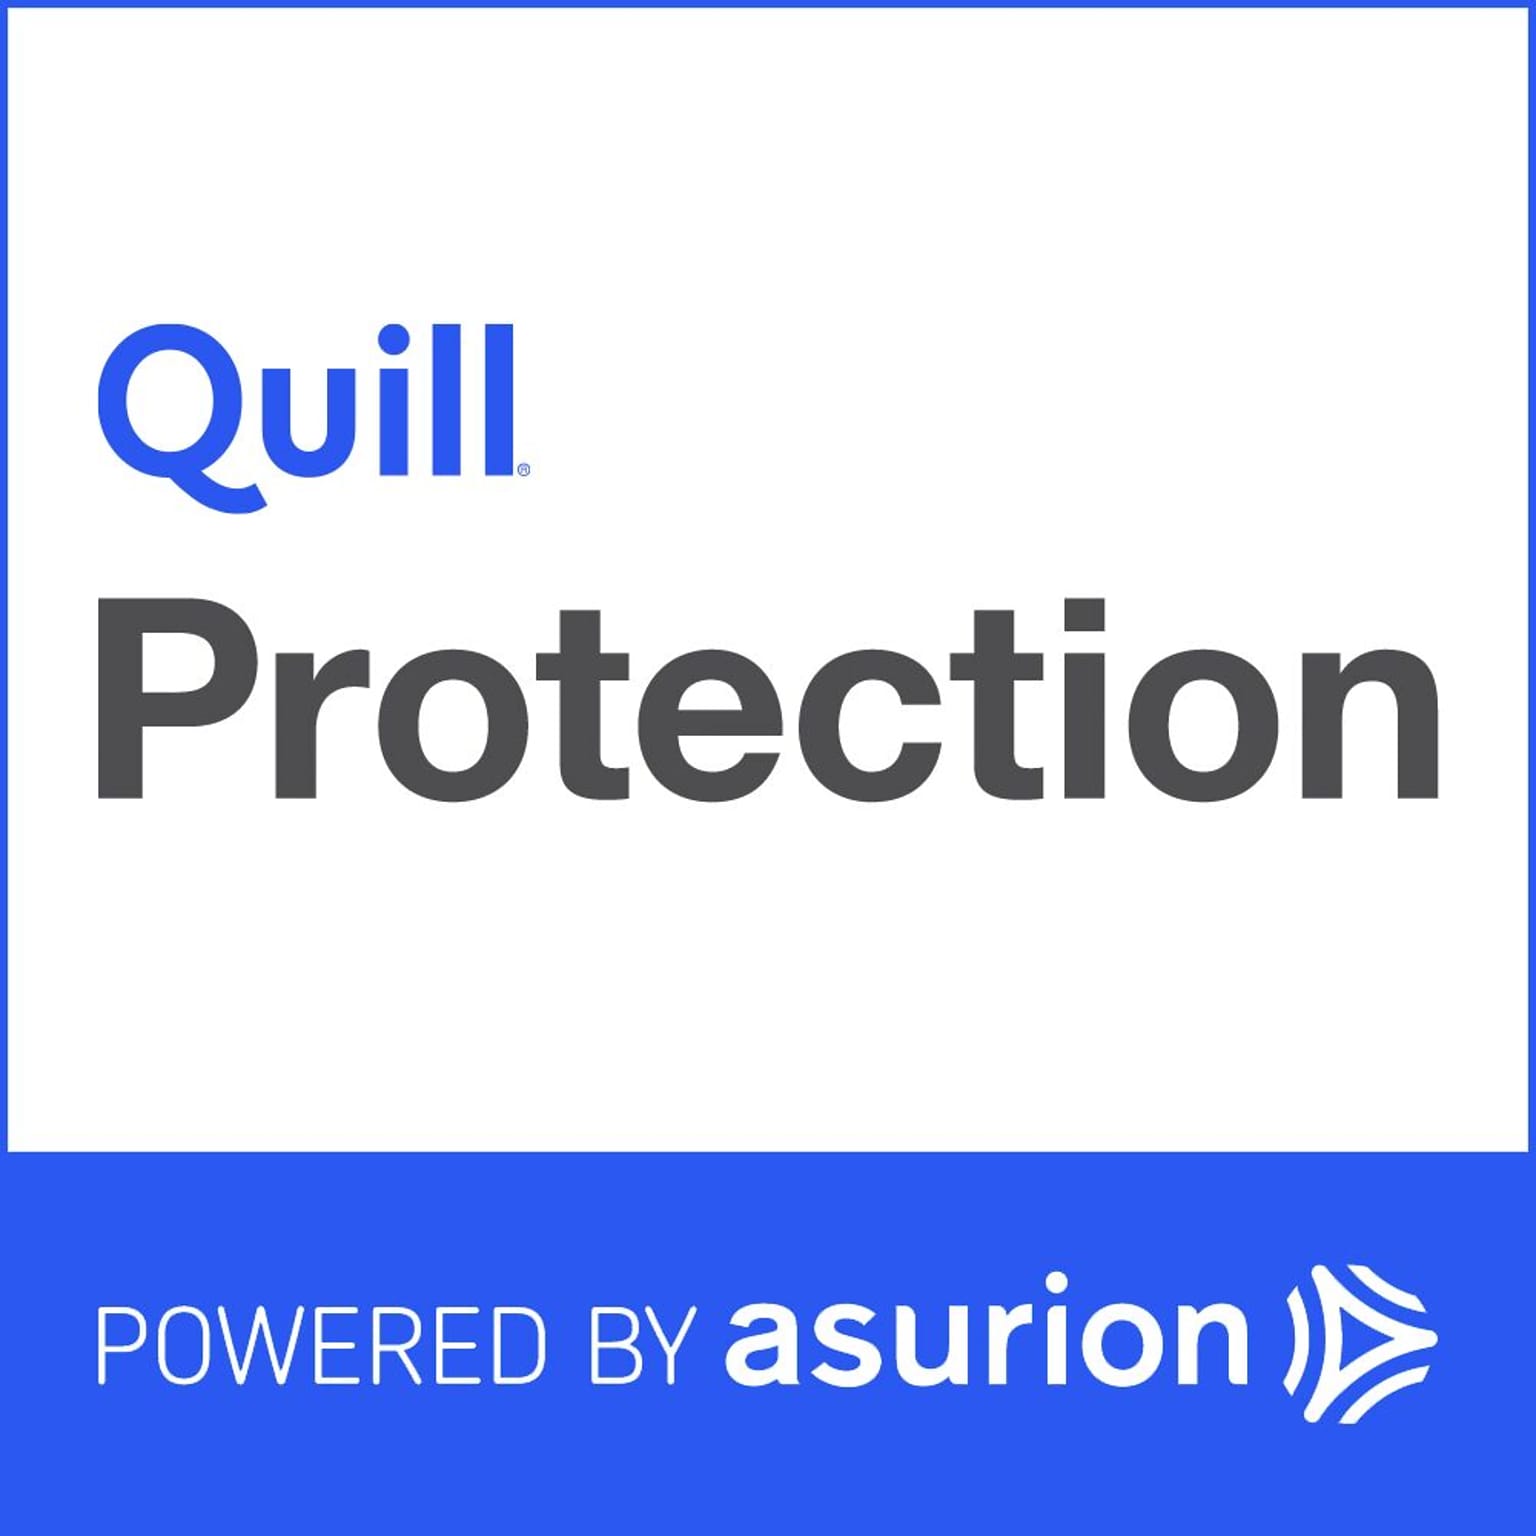 Quill.com 2 Year Protection Plan $60-$99.99